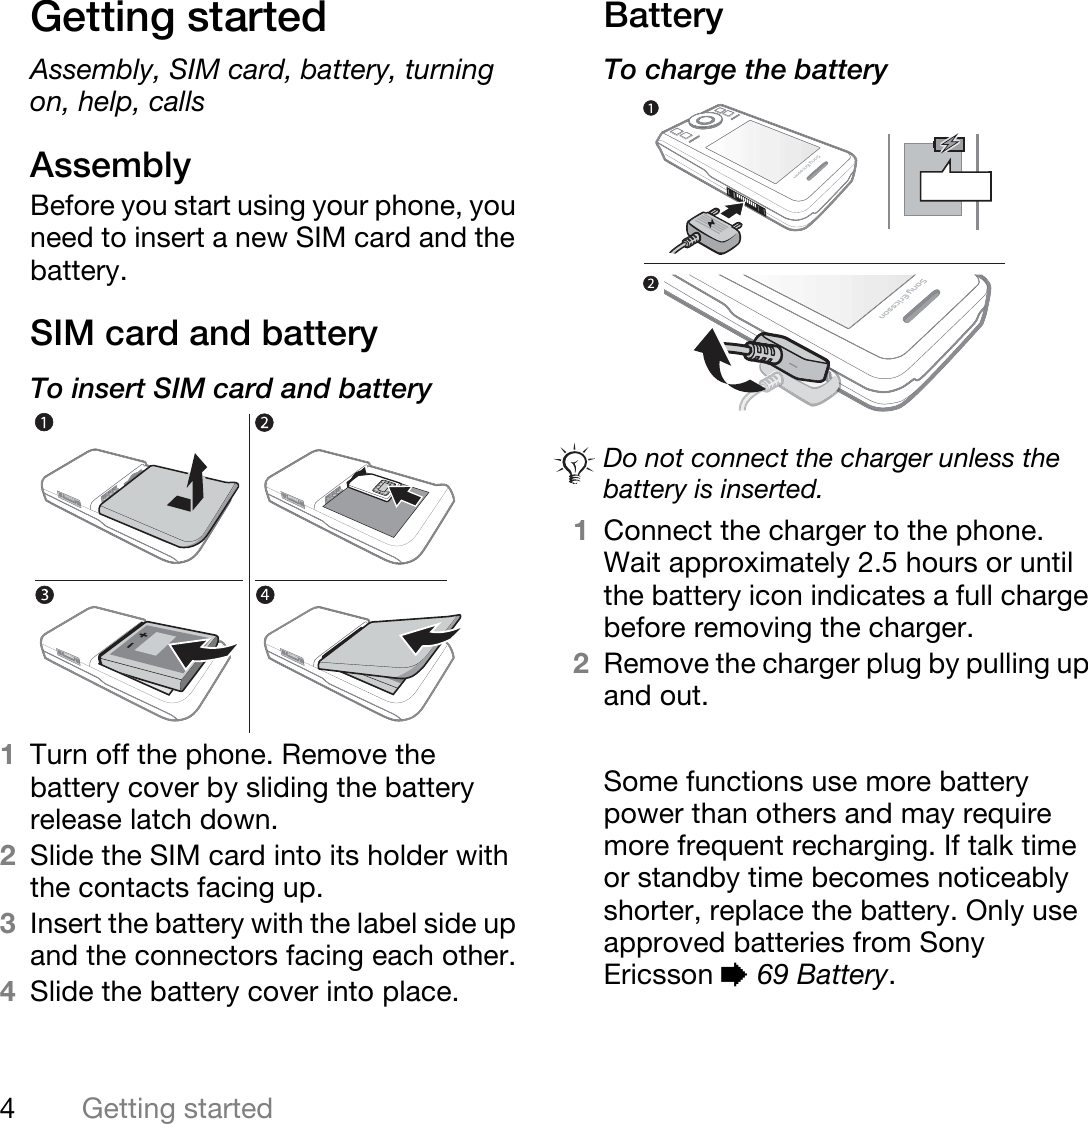 4Getting startedGetting startedAssembly, SIM card, battery, turning on, help, callsAssemblyBefore you start using your phone, you need to insert a new SIM card and the battery.SIM card and batteryTo insert SIM card and battery 1Turn off the phone. Remove the battery cover by sliding the battery release latch down.2Slide the SIM card into its holder with the contacts facing up.3Insert the battery with the label side up and the connectors facing each other.4Slide the battery cover into place.BatteryTo charge the battery  1Connect the charger to the phone. Wait approximately 2.5 hours or until the battery icon indicates a full charge before removing the charger. 2Remove the charger plug by pulling up and out.Some functions use more battery power than others and may require more frequent recharging. If talk time or standby time becomes noticeably shorter, replace the battery. Only use approved batteries from Sony Ericsson % 69 Battery.Do not connect the charger unless the battery is inserted.